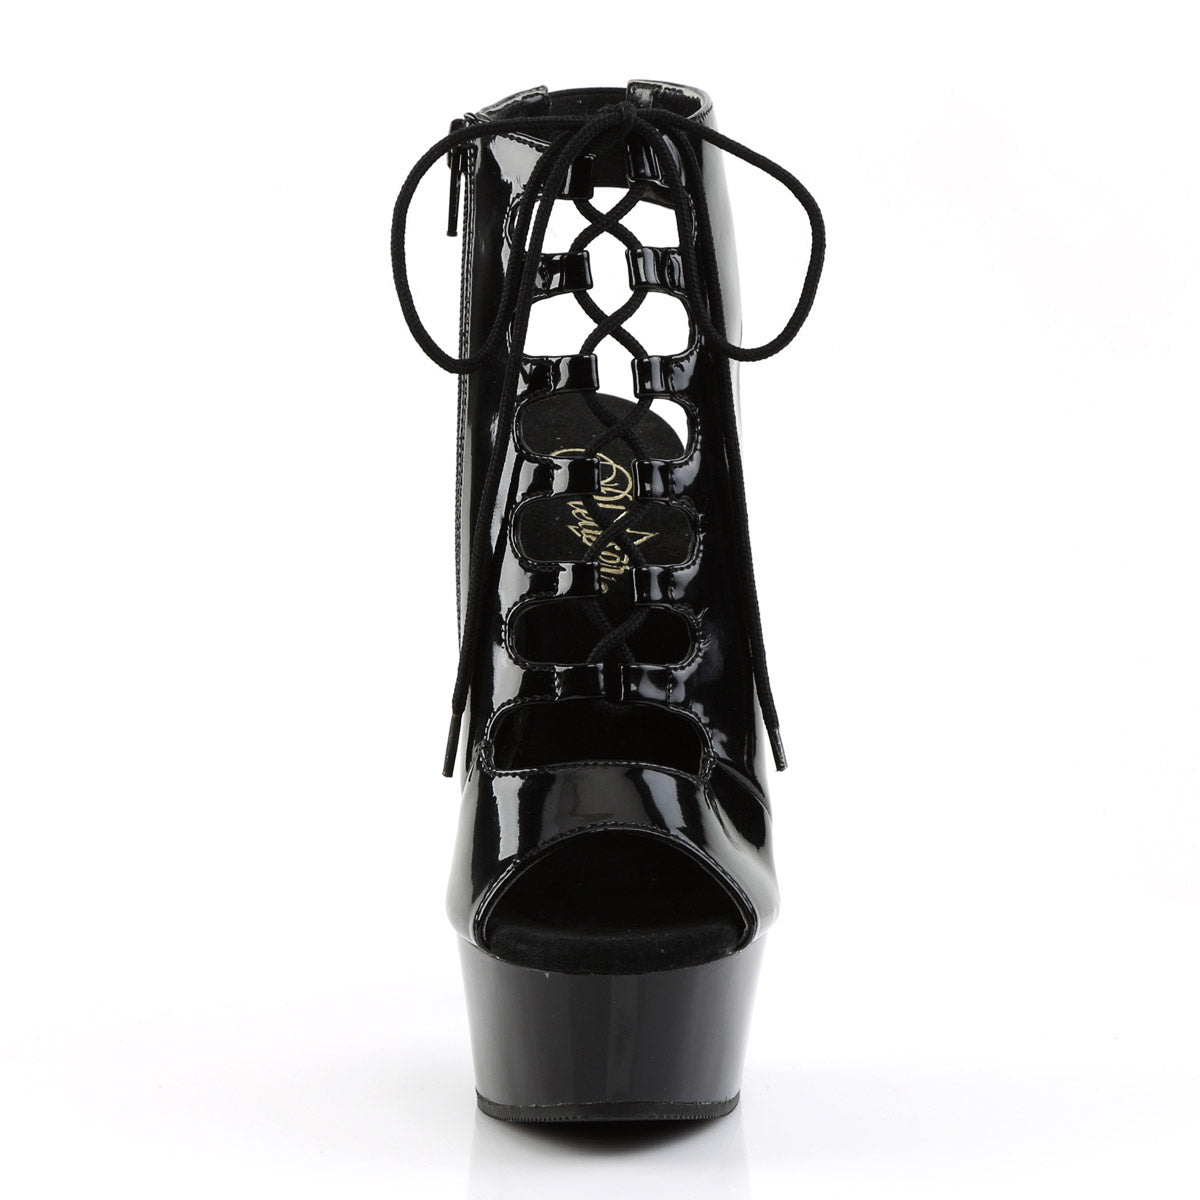 Sexy Ankle Cutout Lace Up Platform Stiletto Sandals High Heels Shoes Pleaser Pleaser DELIGHT/600/20